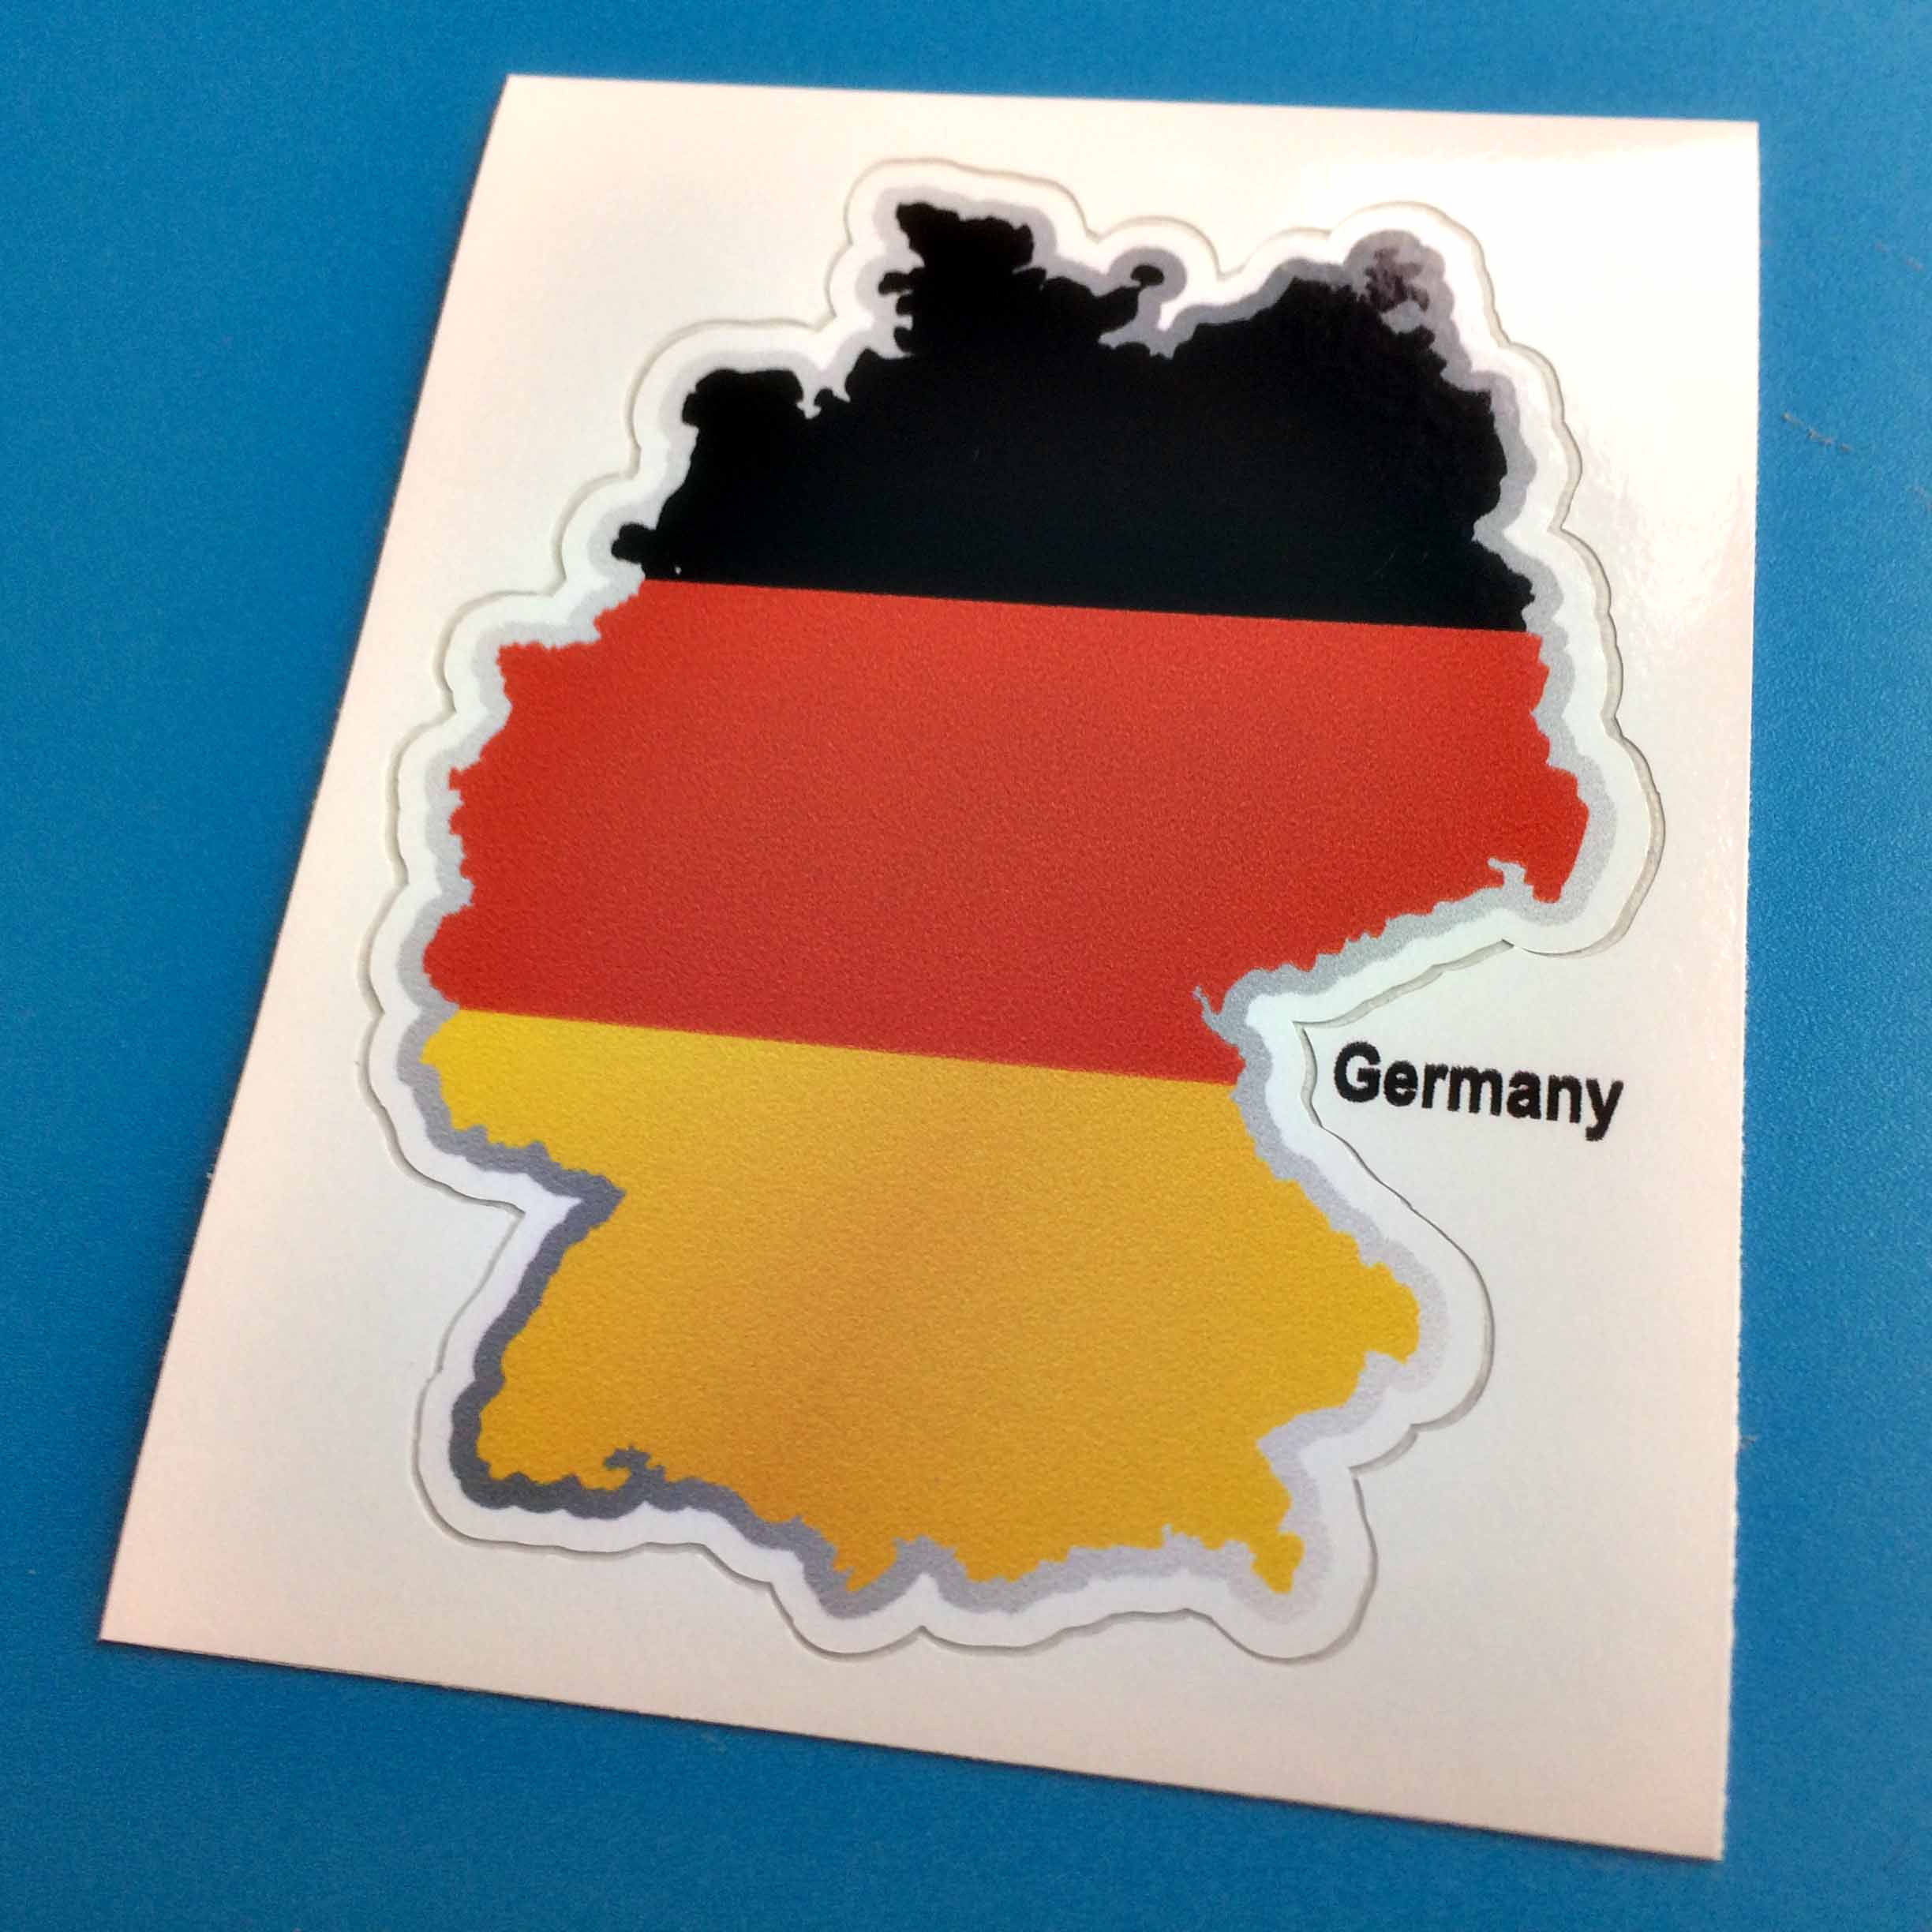 GERMANY FLAG AND MAP STICKER. A flag and map of Germany. Three horizontal bands of black, red and gold.